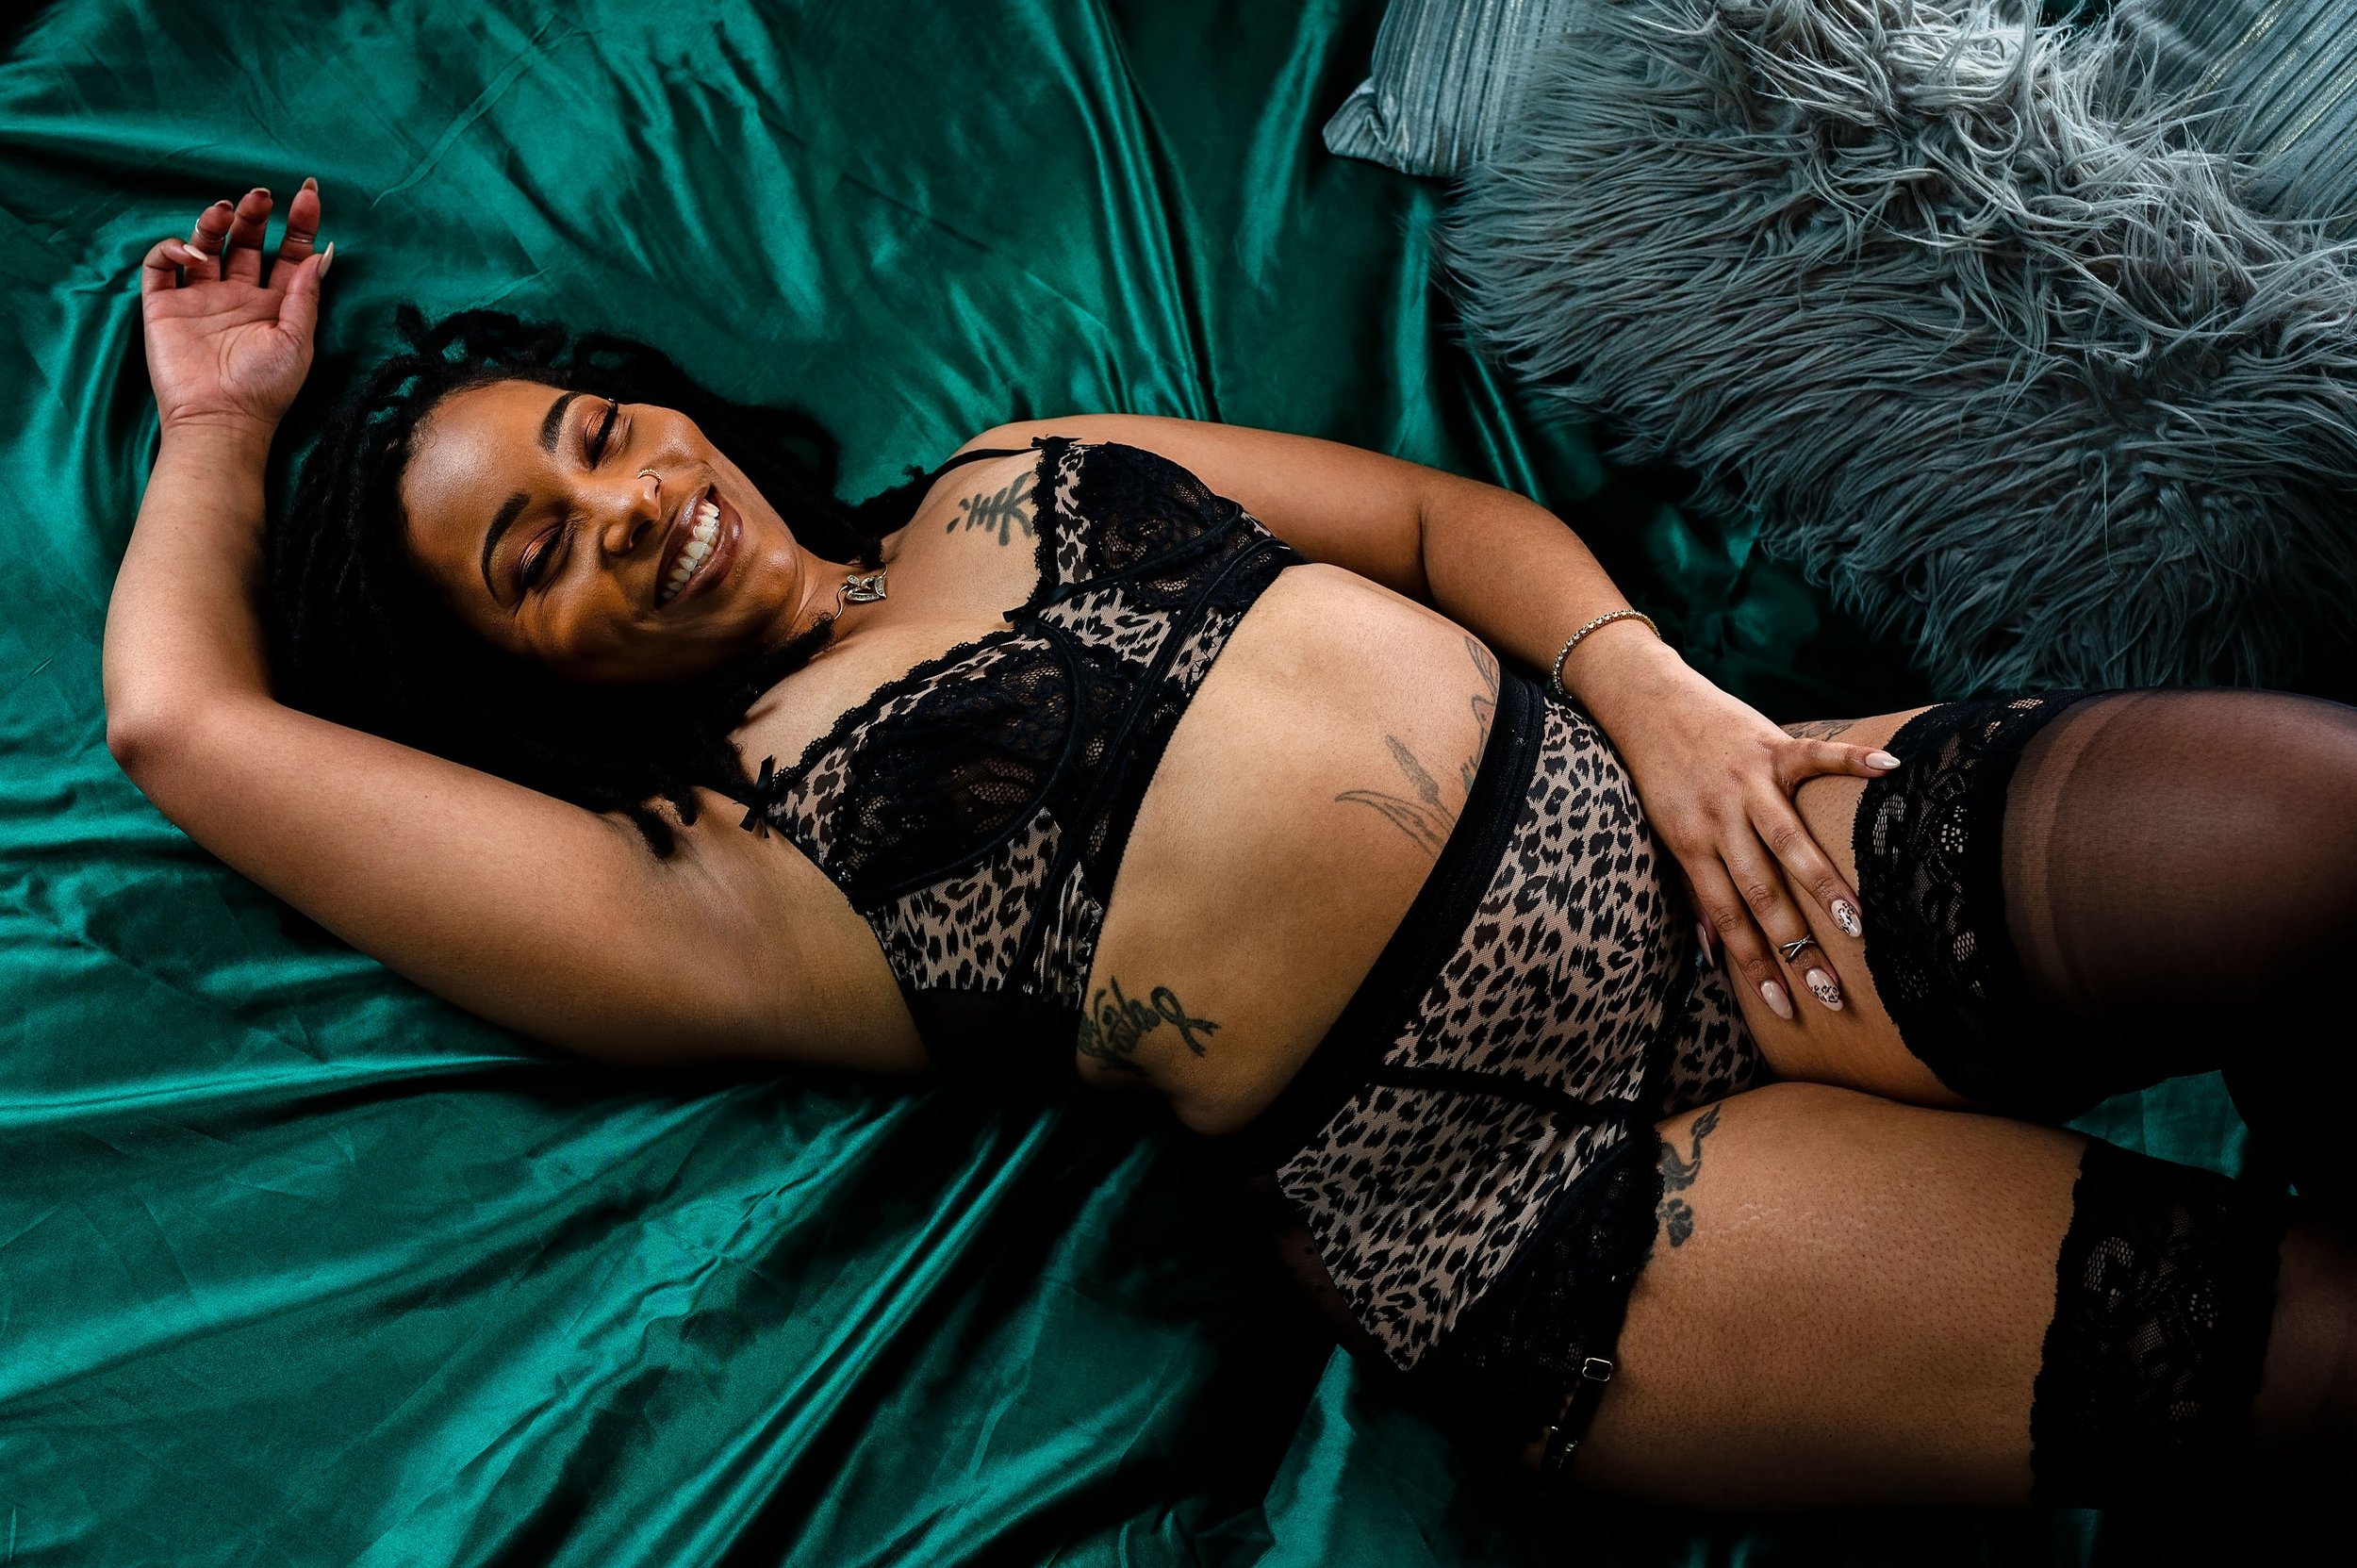  Top Boudoir photographer in Louisville, Kentucky for women and couples.  Black Female Photographer Chanel Nicole specializes in photographing women to help them feel confident. 